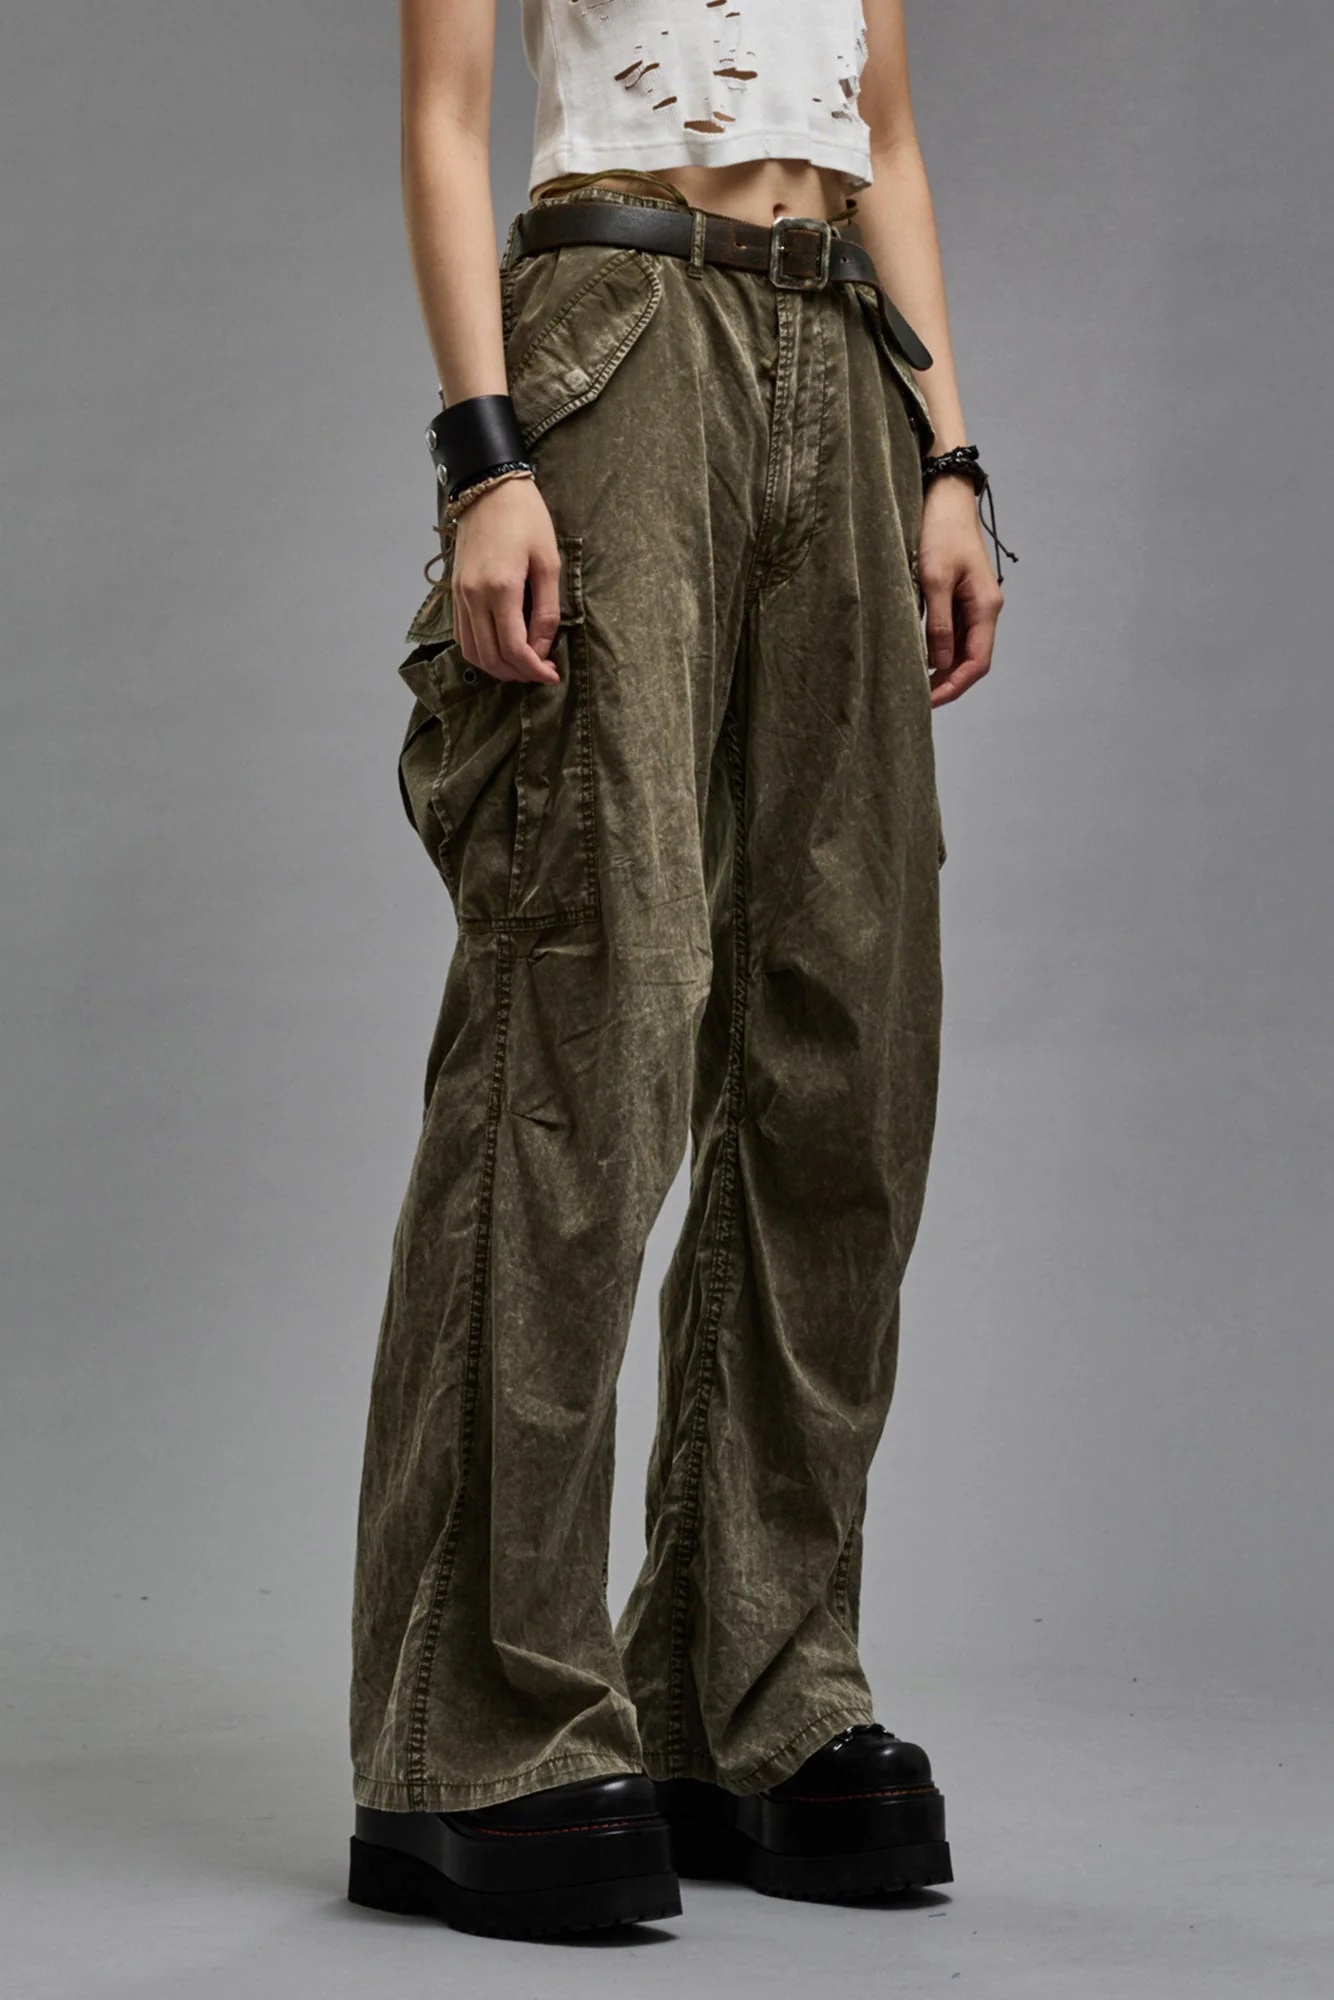 R13 Wide Leg Cargo Pant in Washed Olive 31